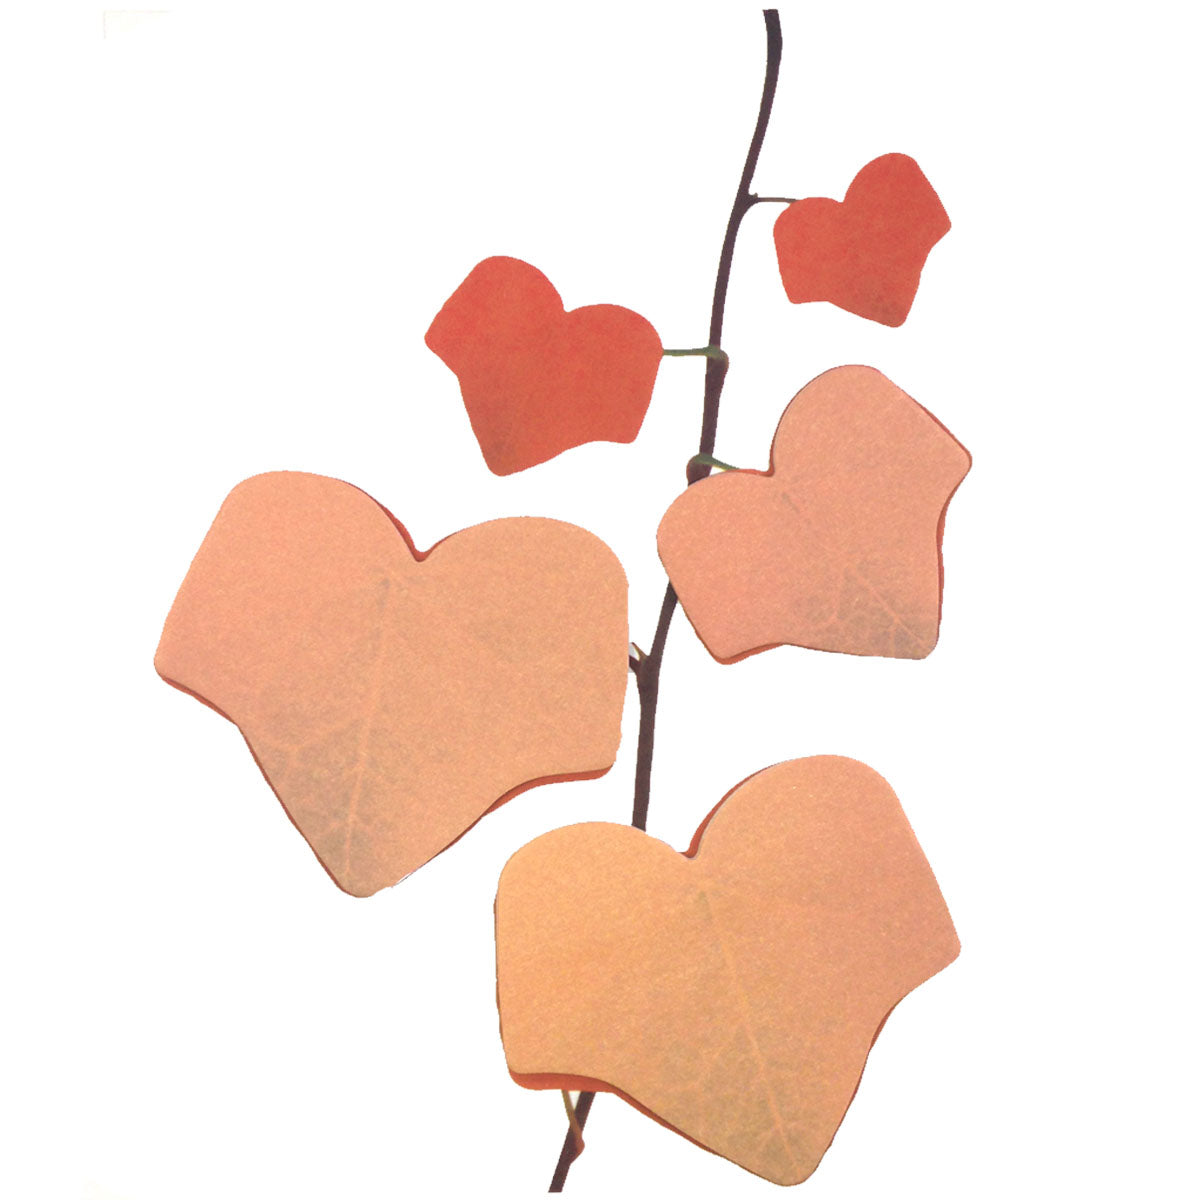 Wrapables Tree Leaf Sticky Notes